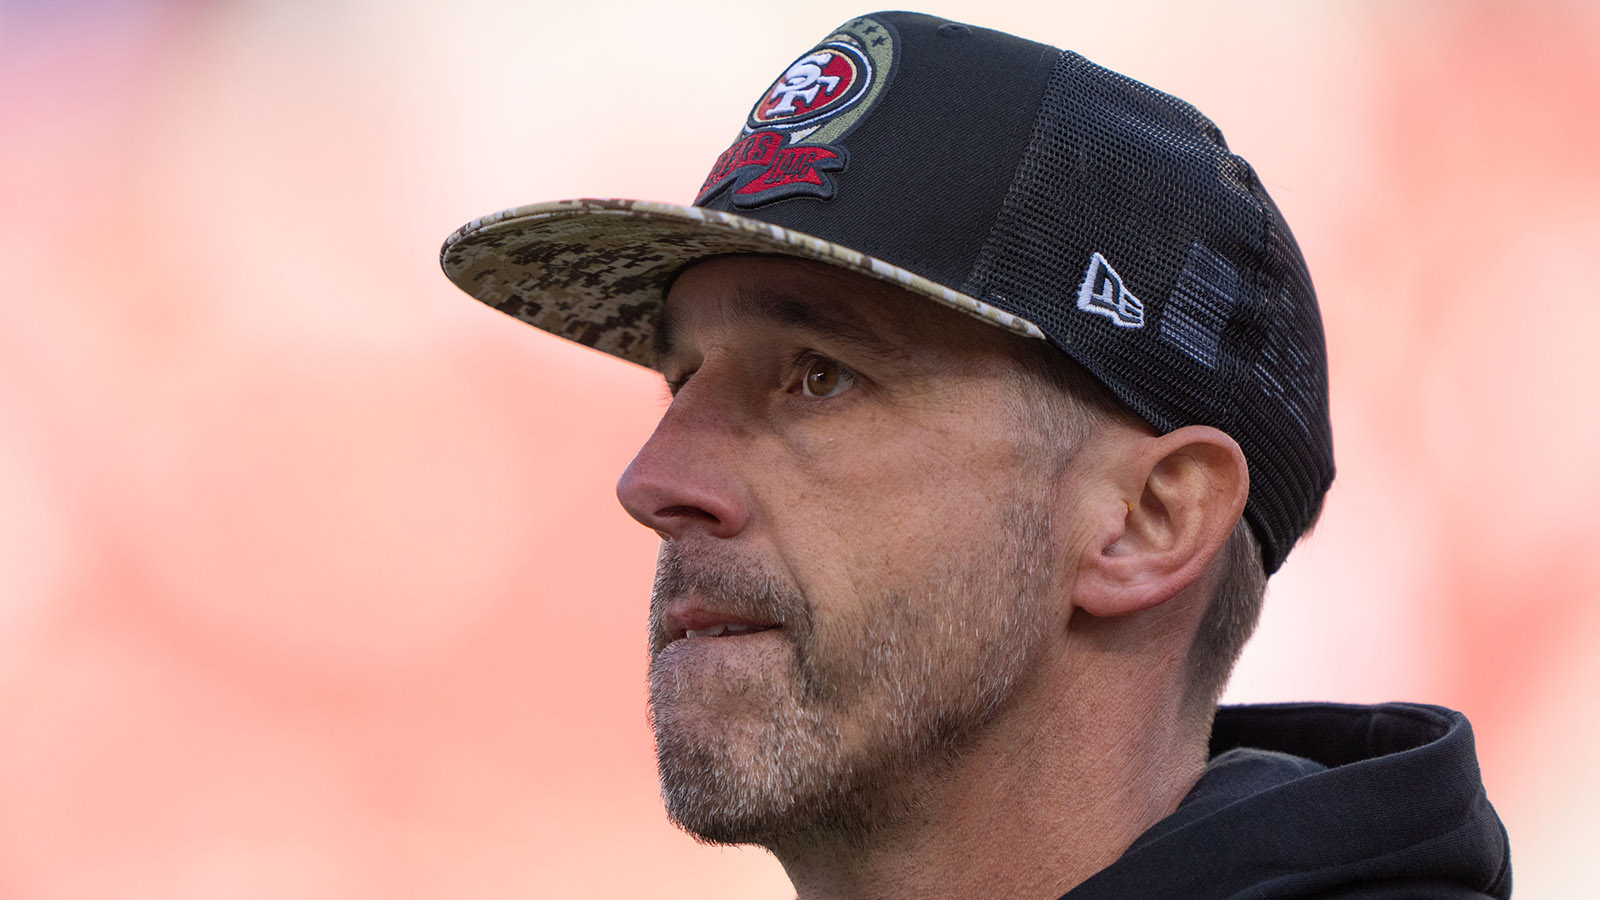 San Francisco 49ers coach Kyle Shanahan upset with hat rules in NFL